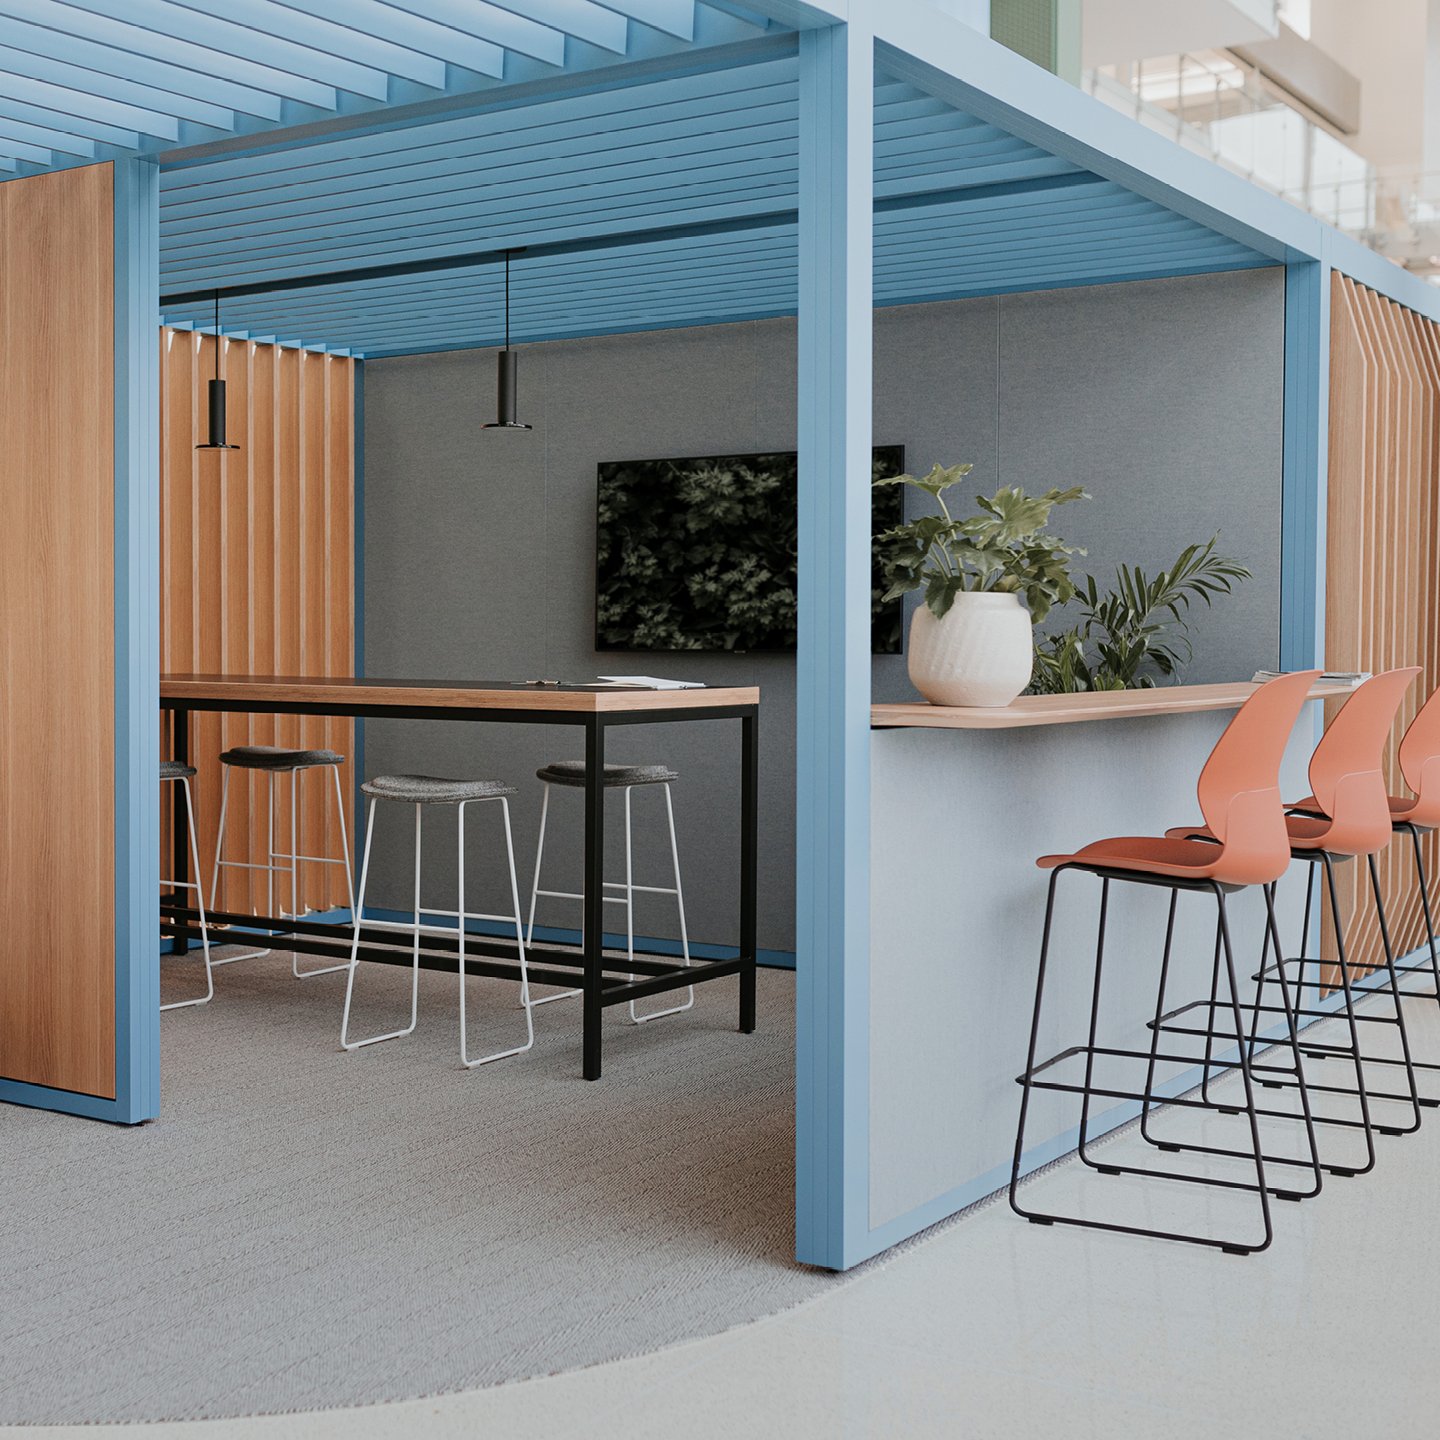 Haworth Pergola Workspace with blue trim and blue walls with tall table and chairs for collaboration in an open office space